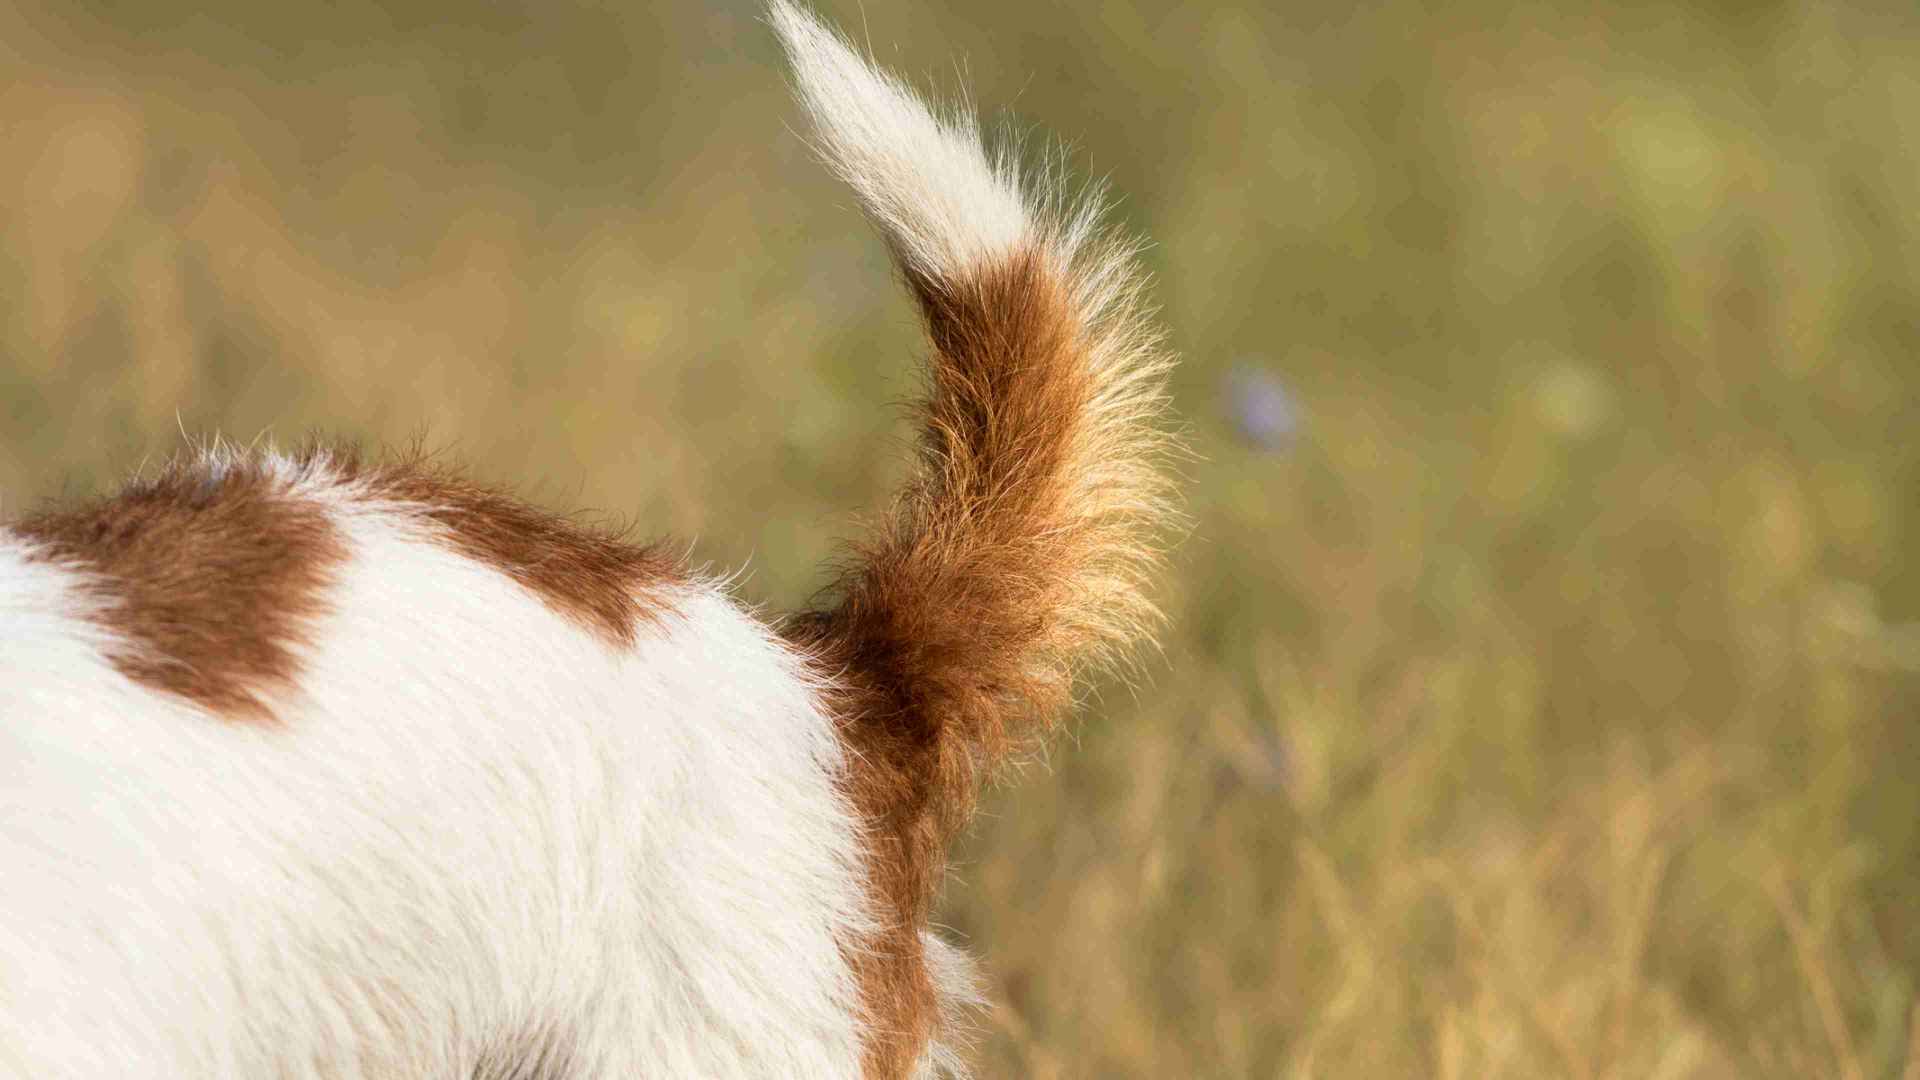 A dog's furry tail